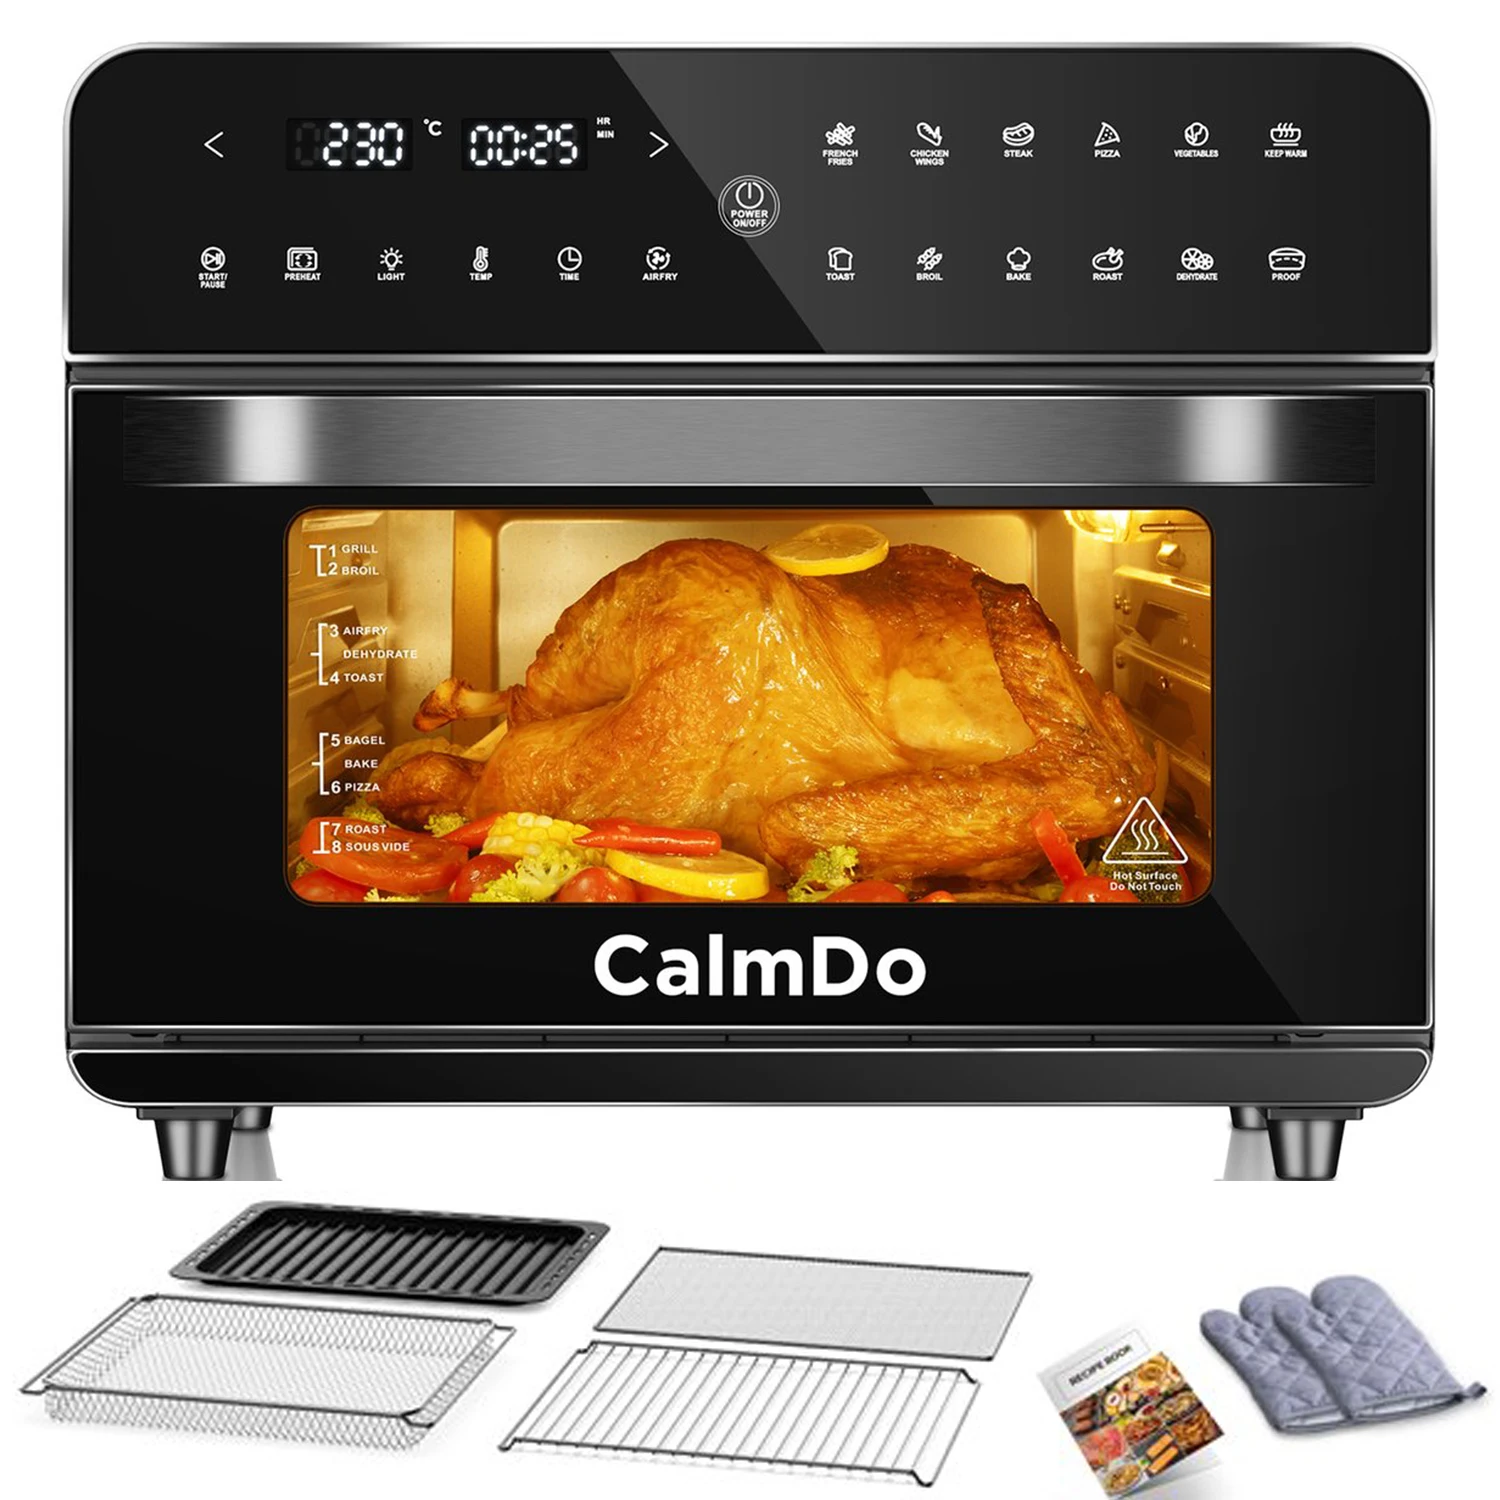 

CalmDo 1800W Air Fryer Oven Rotisserie Dehydrator 25L/26.3QT LED Large Capacity Chicken Frying Oven Multifunction Smart Air Oven